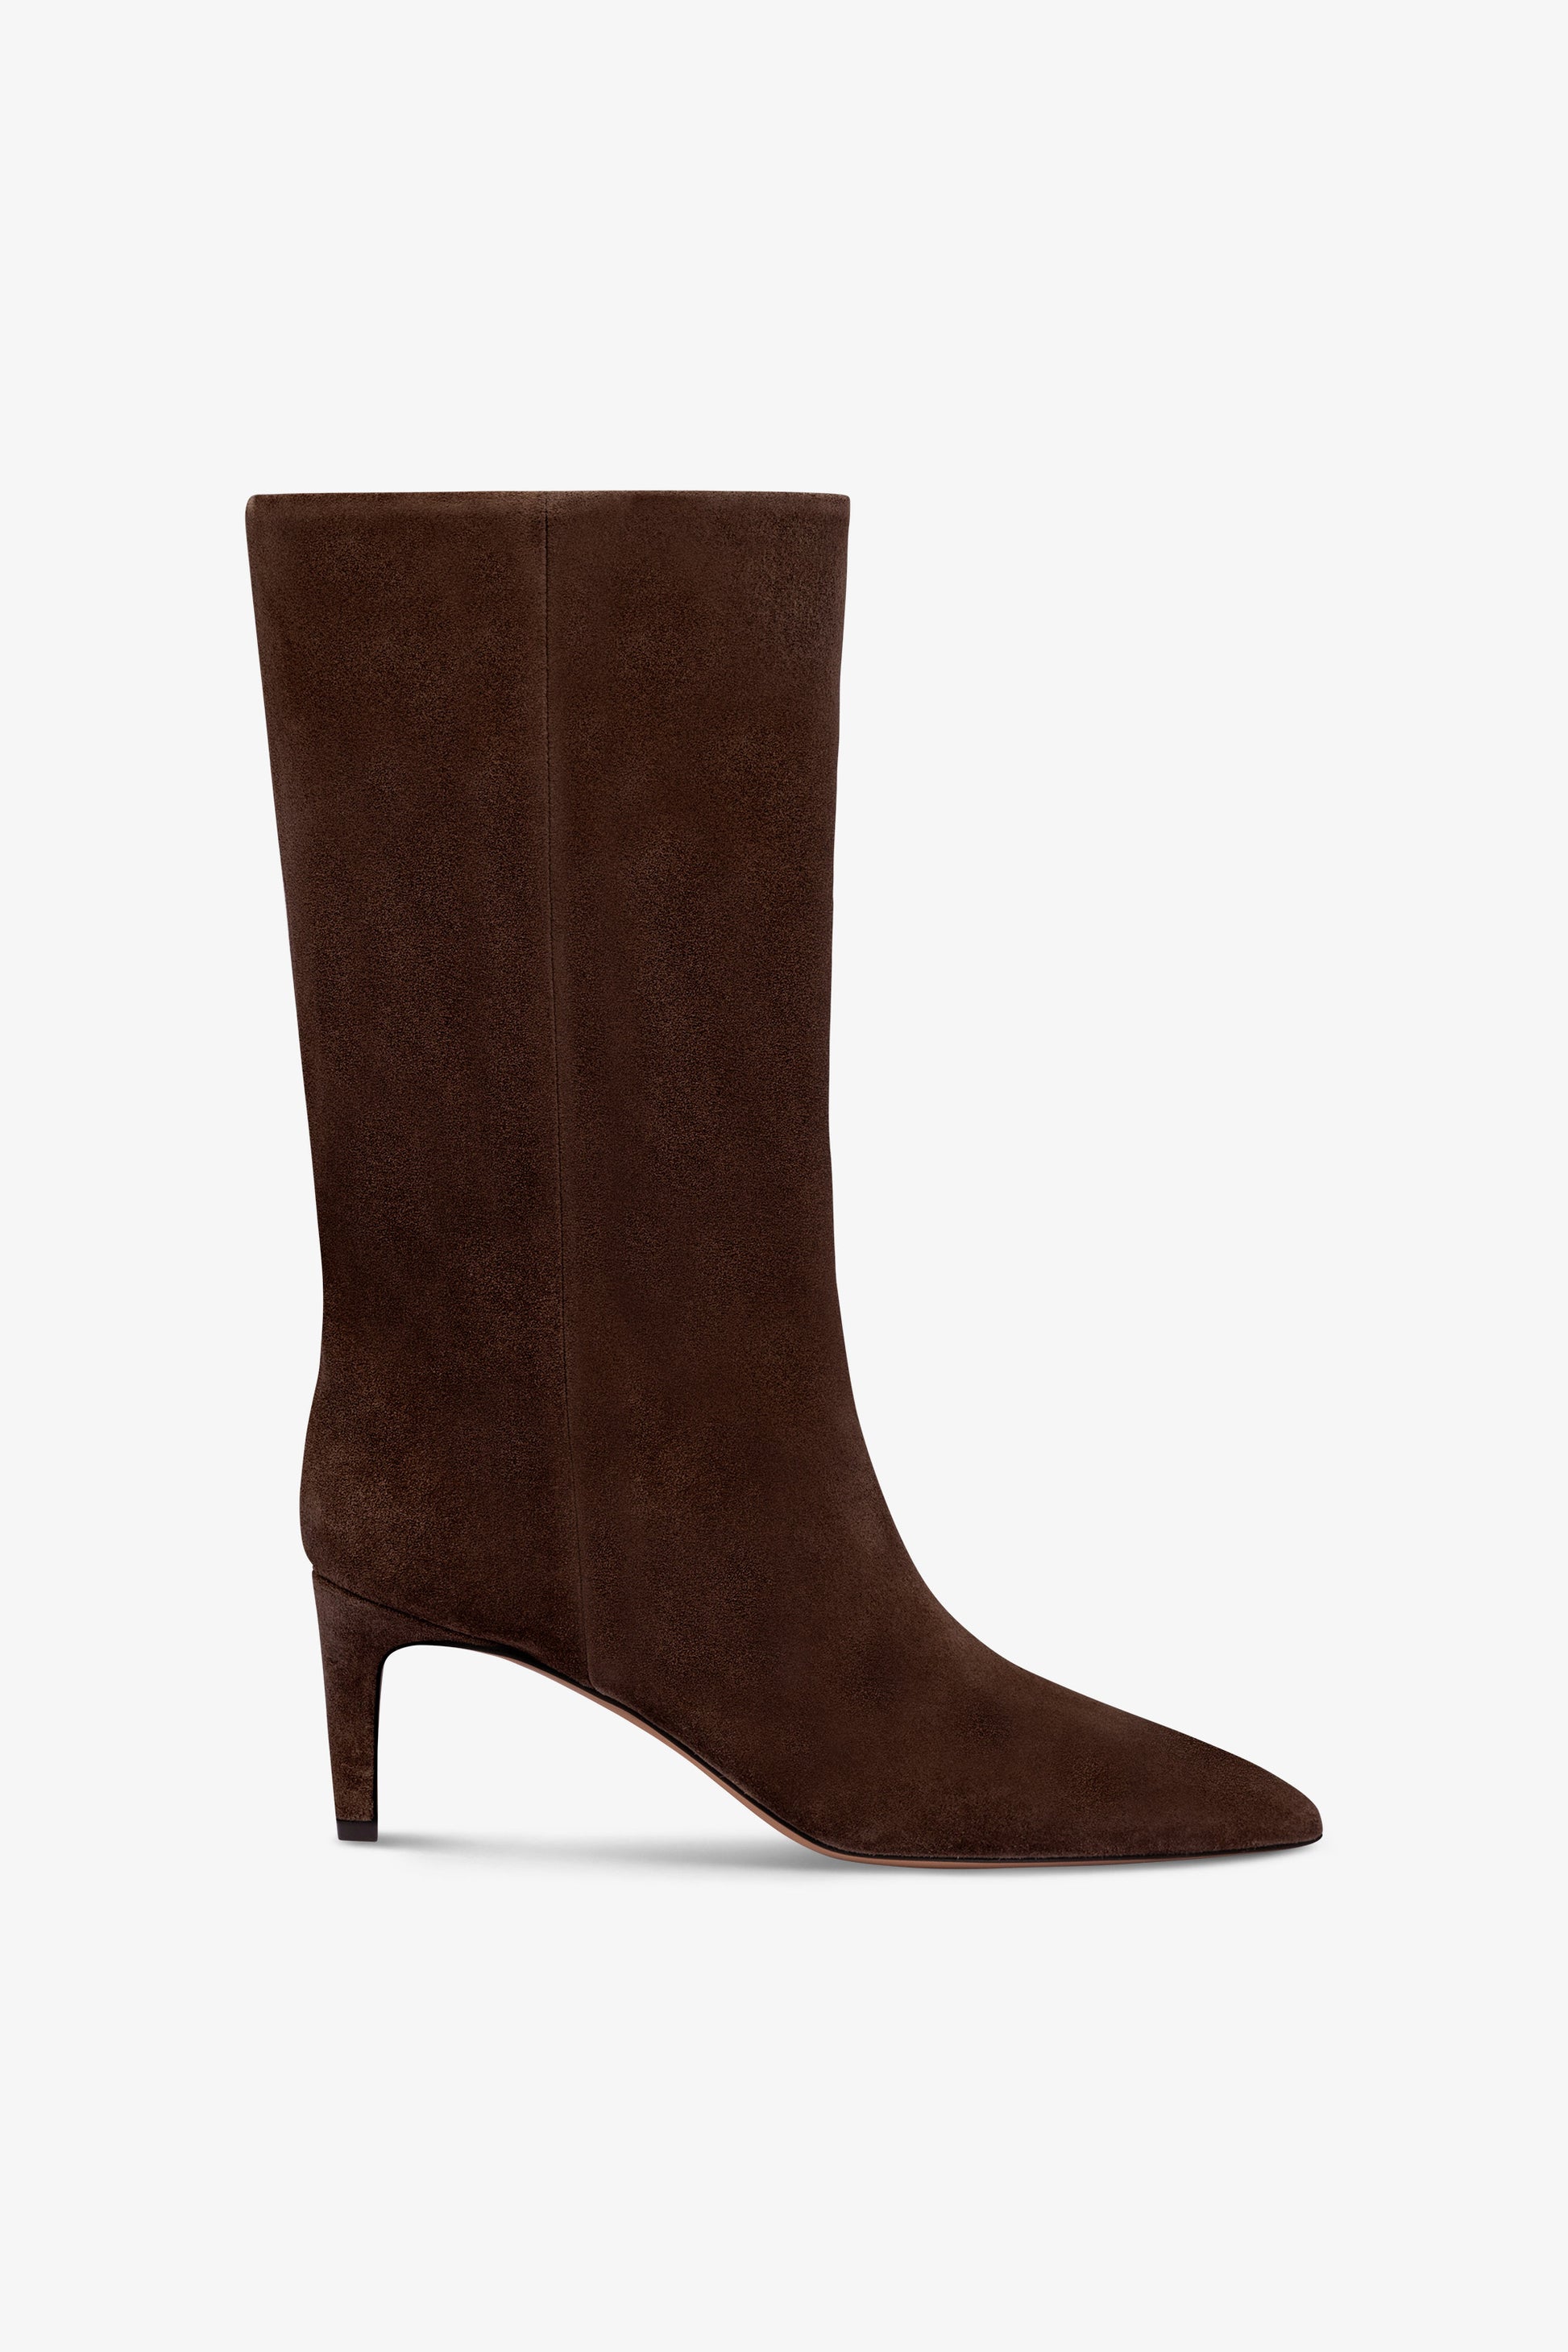 Calf-high boots in smooth pepper suede leather